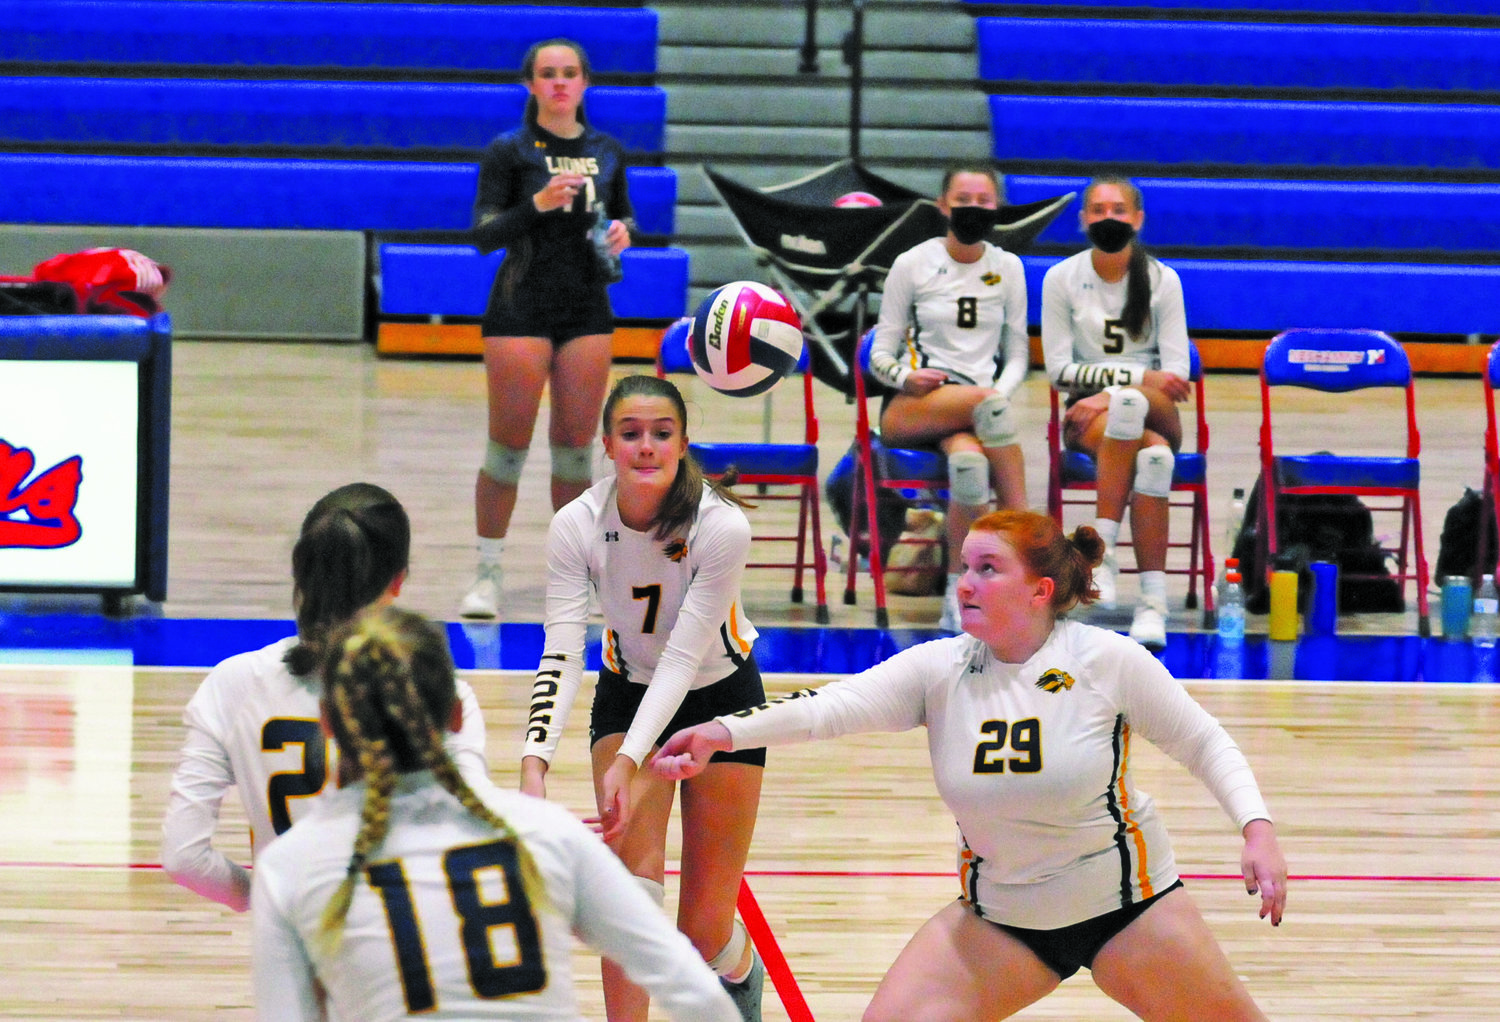 New Hope-Solebury senior Violet Cole-Glick, No. 29, right, and sophomore Anna Leasure, No. 7, take aim at the ball in a girls volleyball match Sept. 15 at Neshaminy High School.